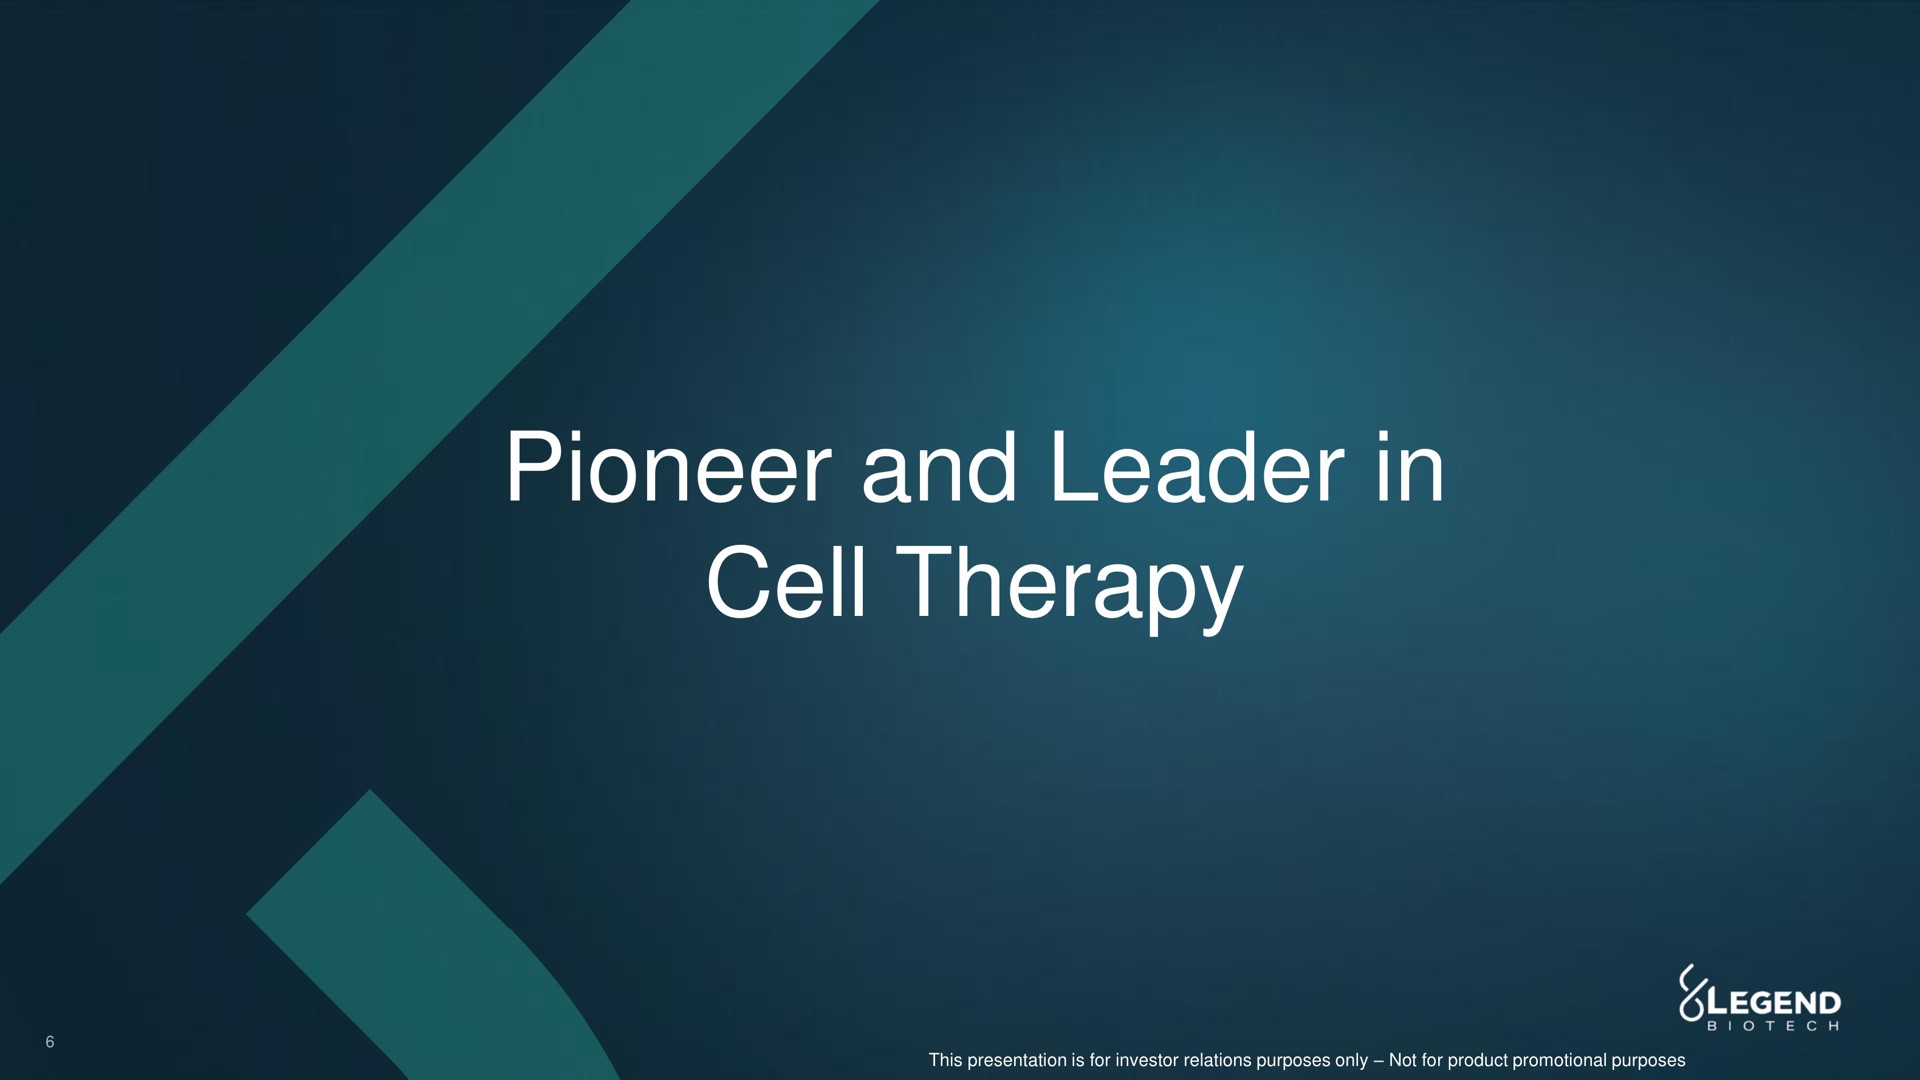 pioneer and leader in cell therapy | Legend Biotech